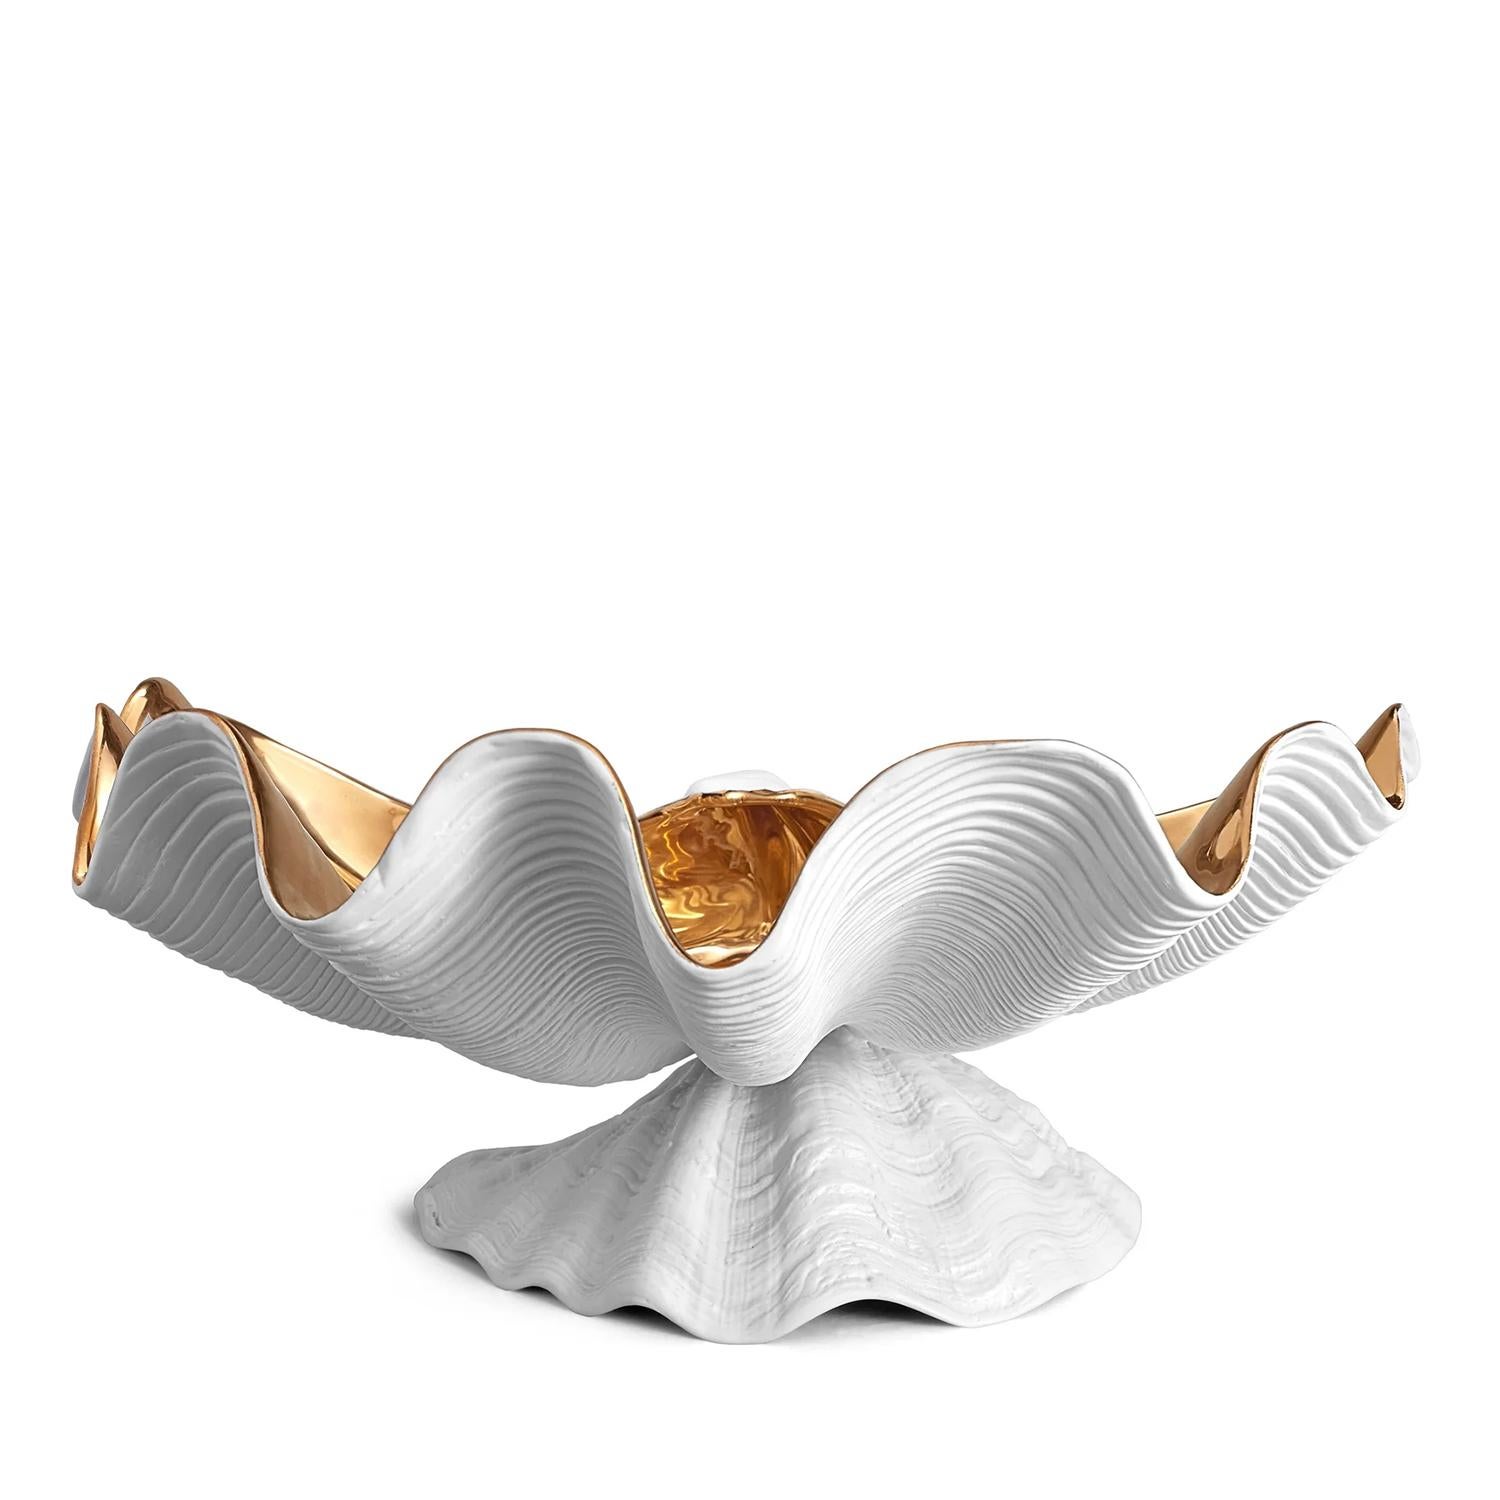 Dish sea shell gold with all structure in 
fine hand-crafted porcelain in white finish
and with 24 karat gold painted.
Delivered in luxury gift box.